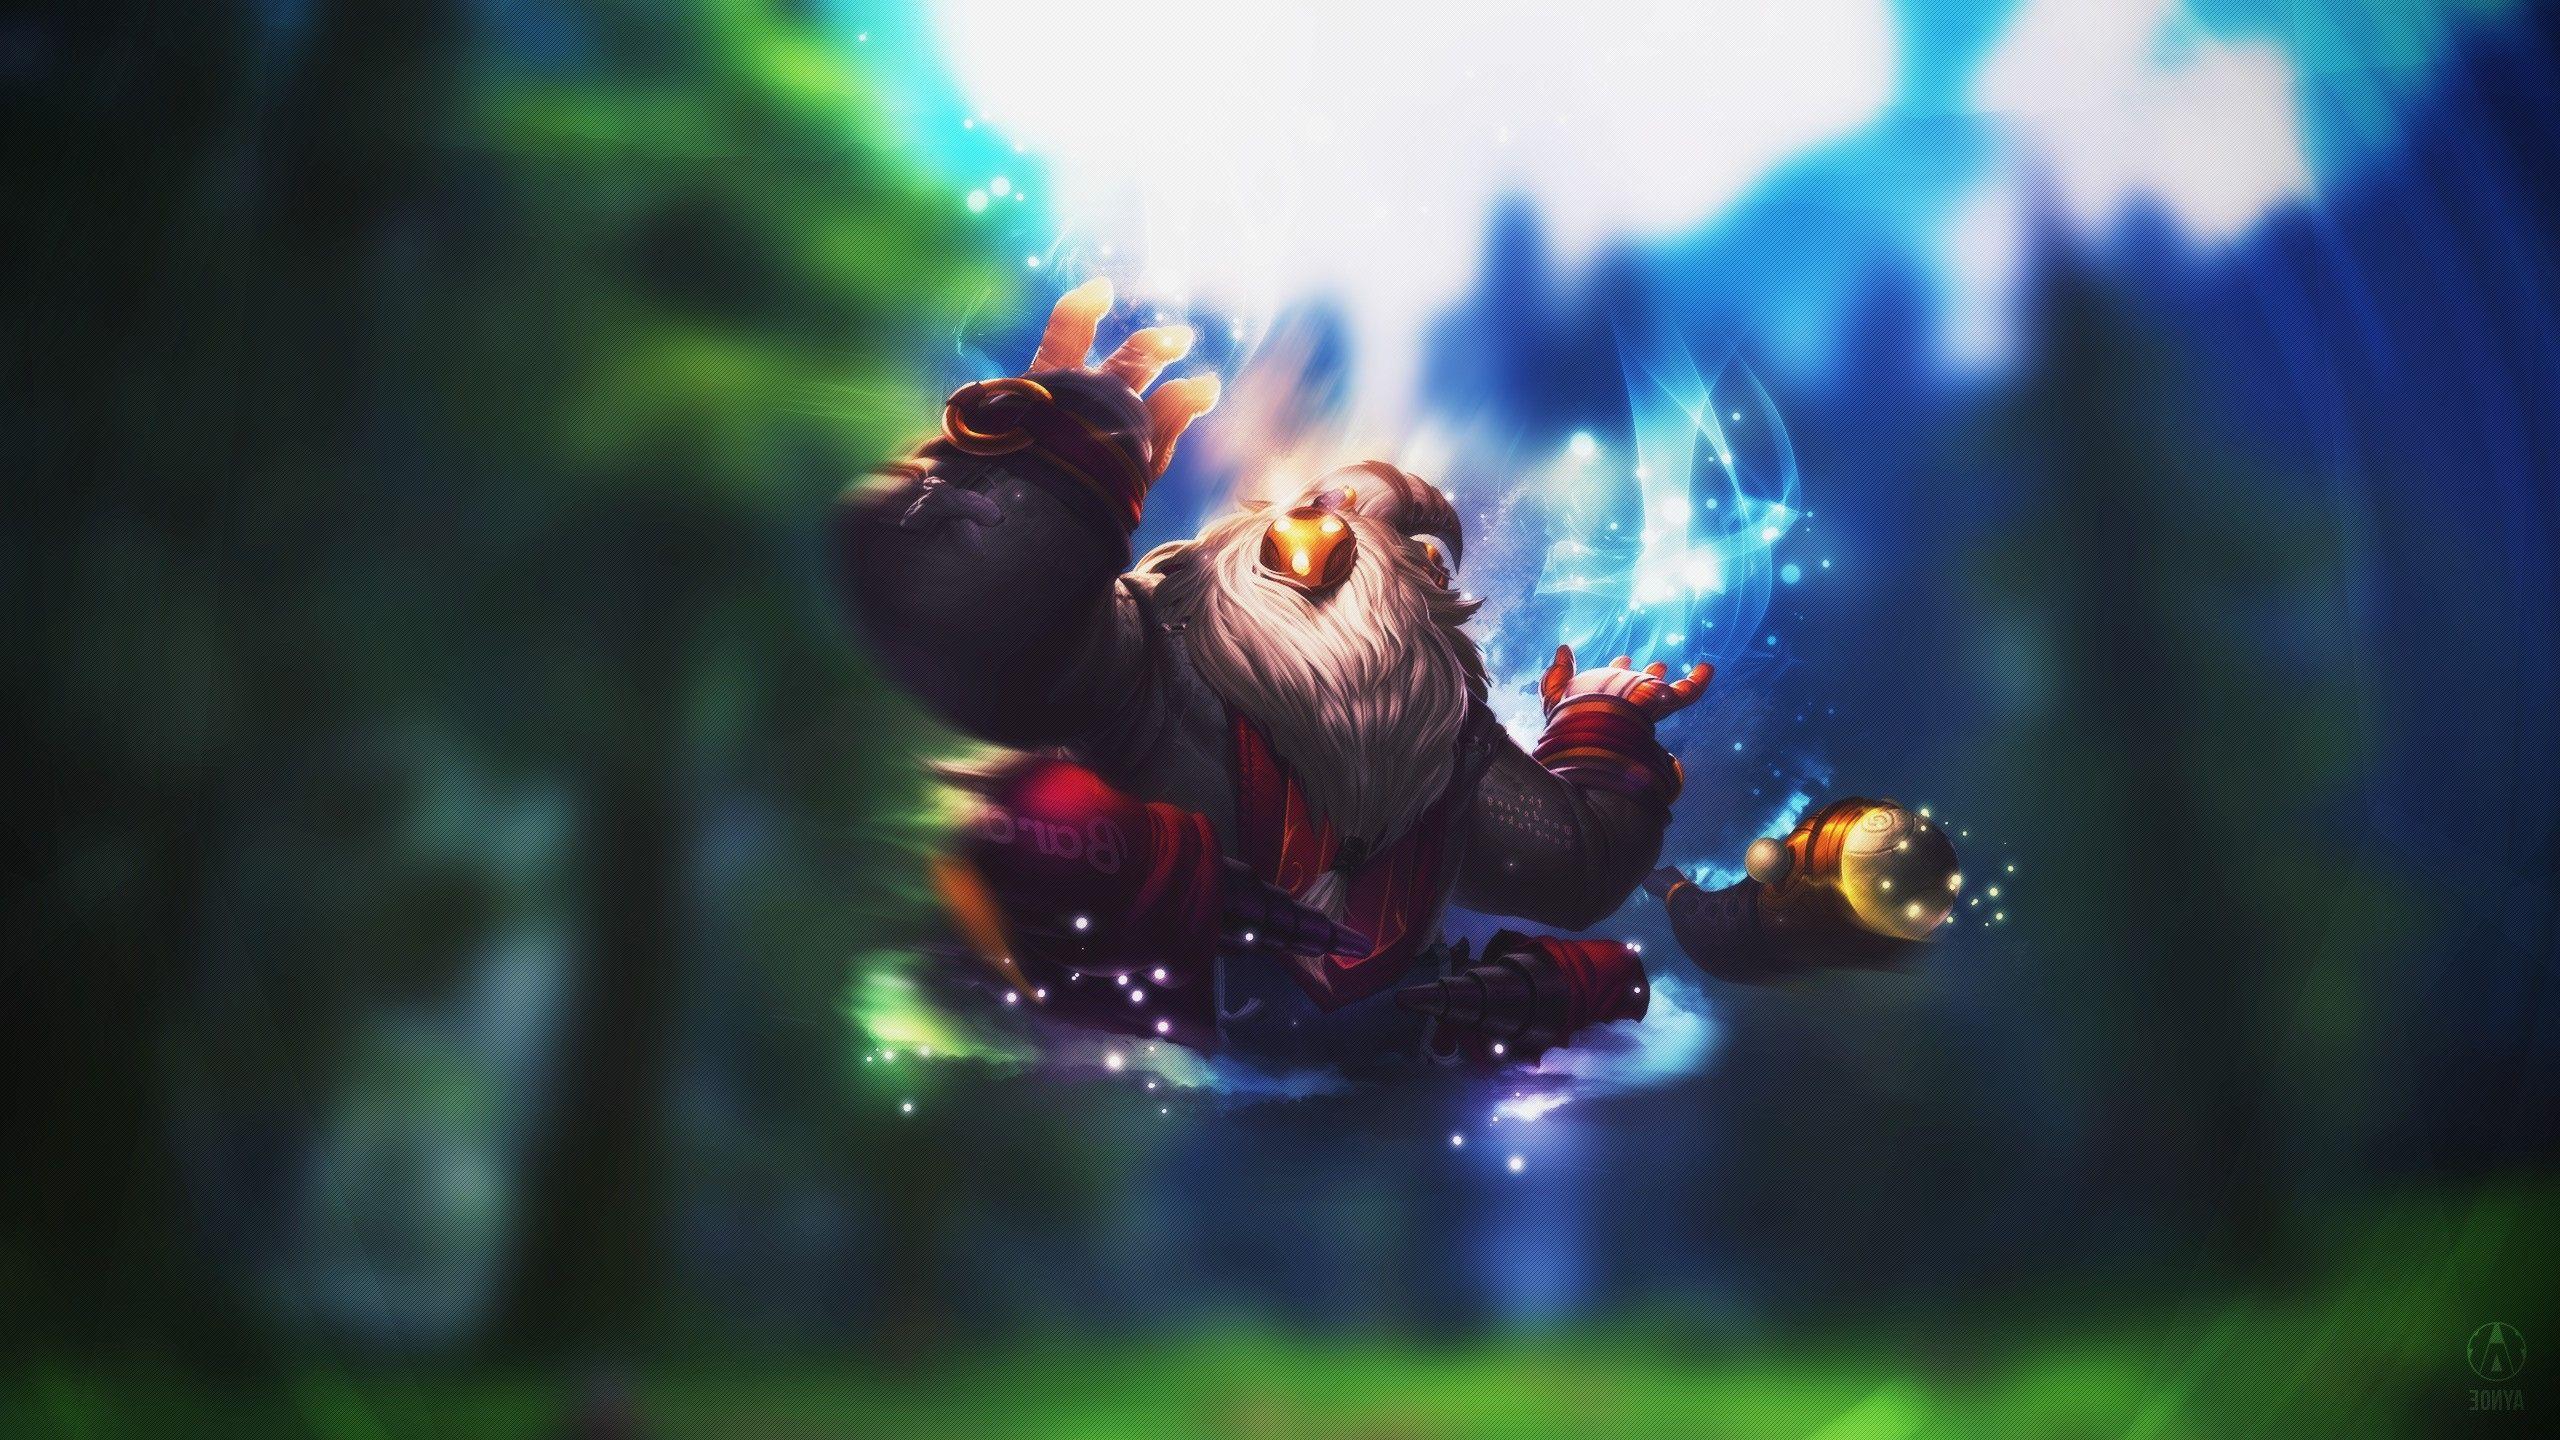 league of legends support bard wallpaper and background